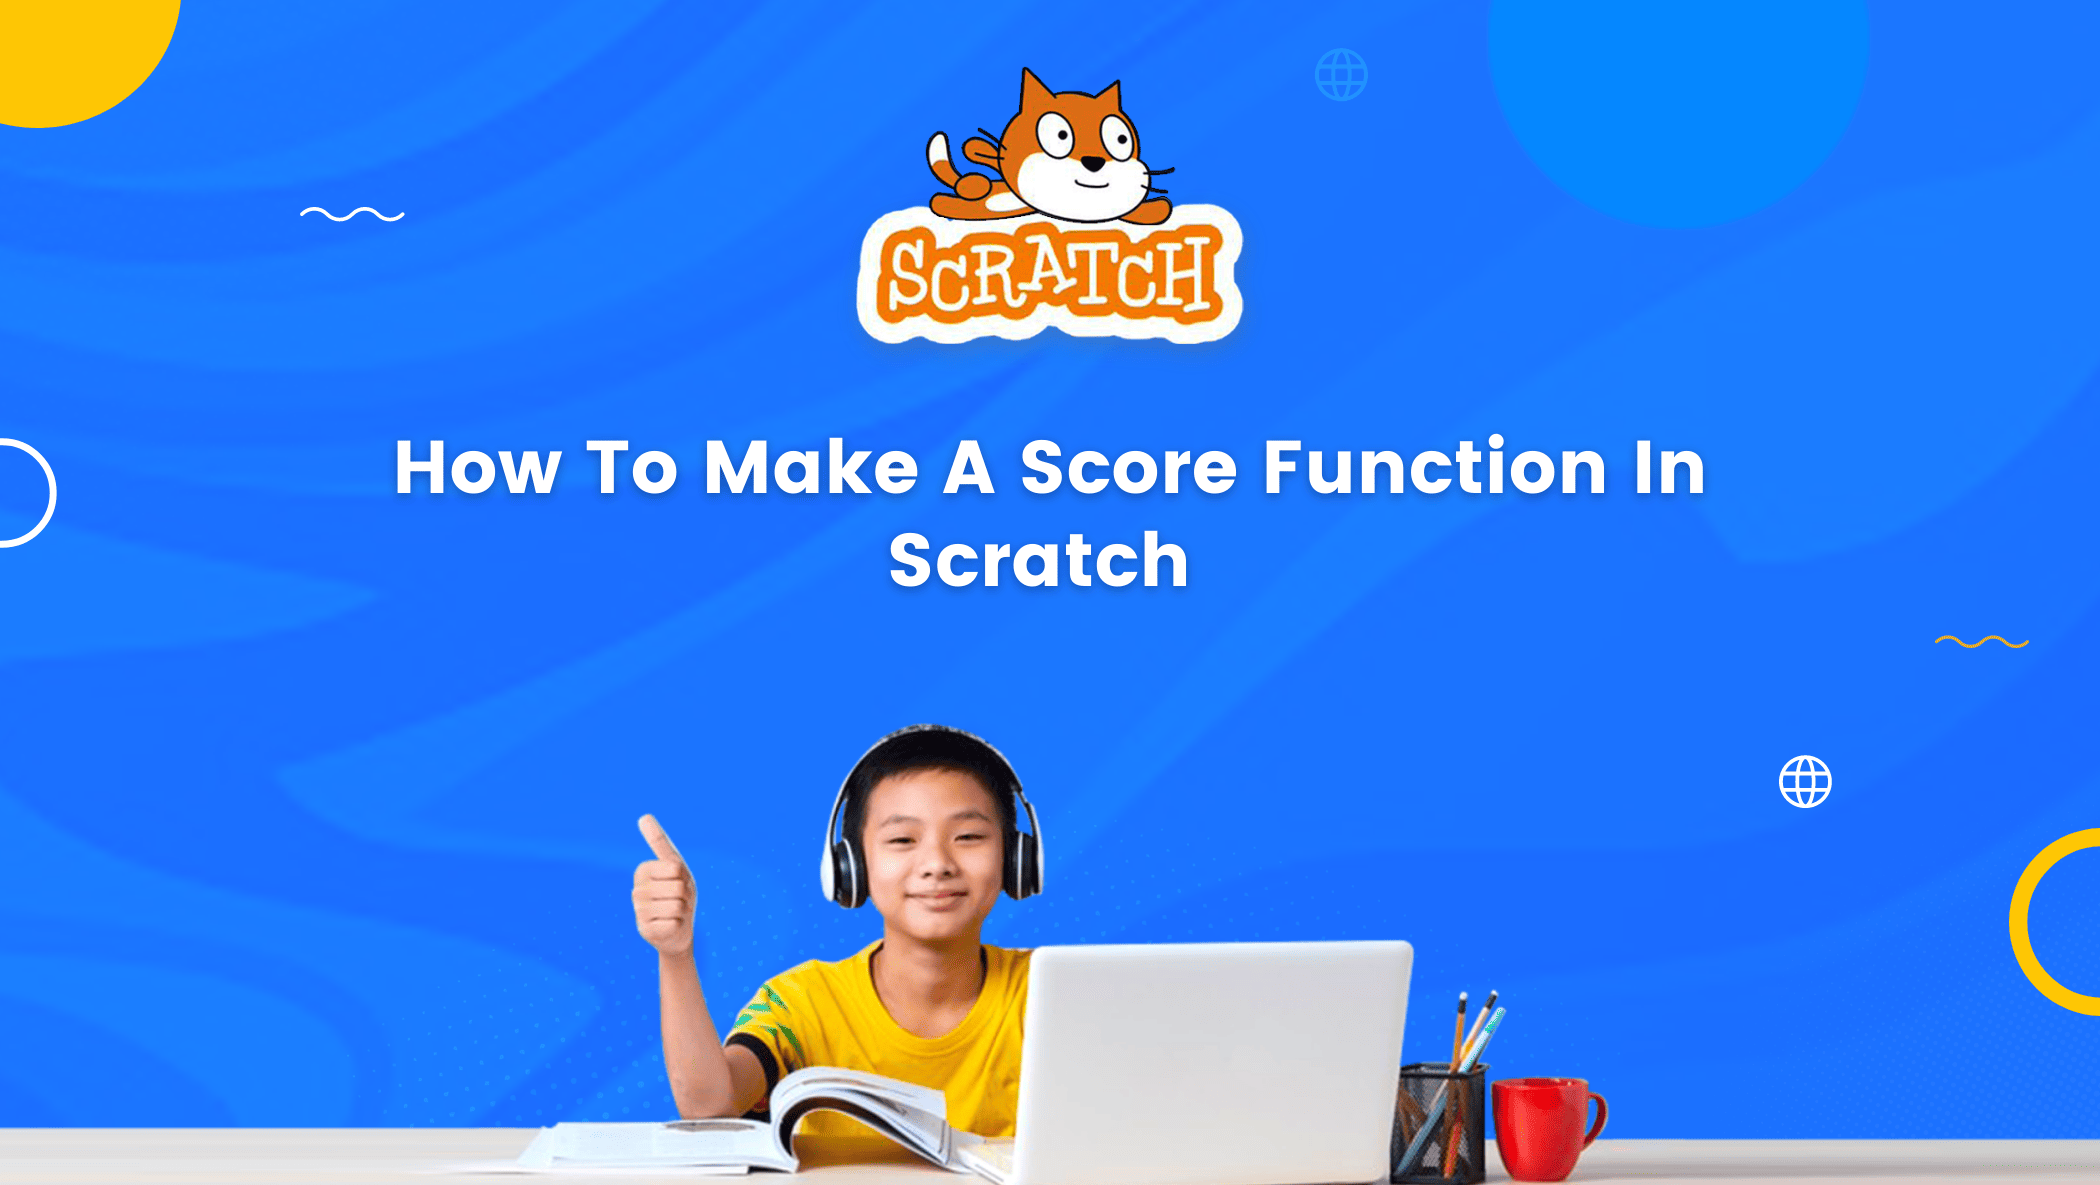 How To Make A Score Function In Scratch